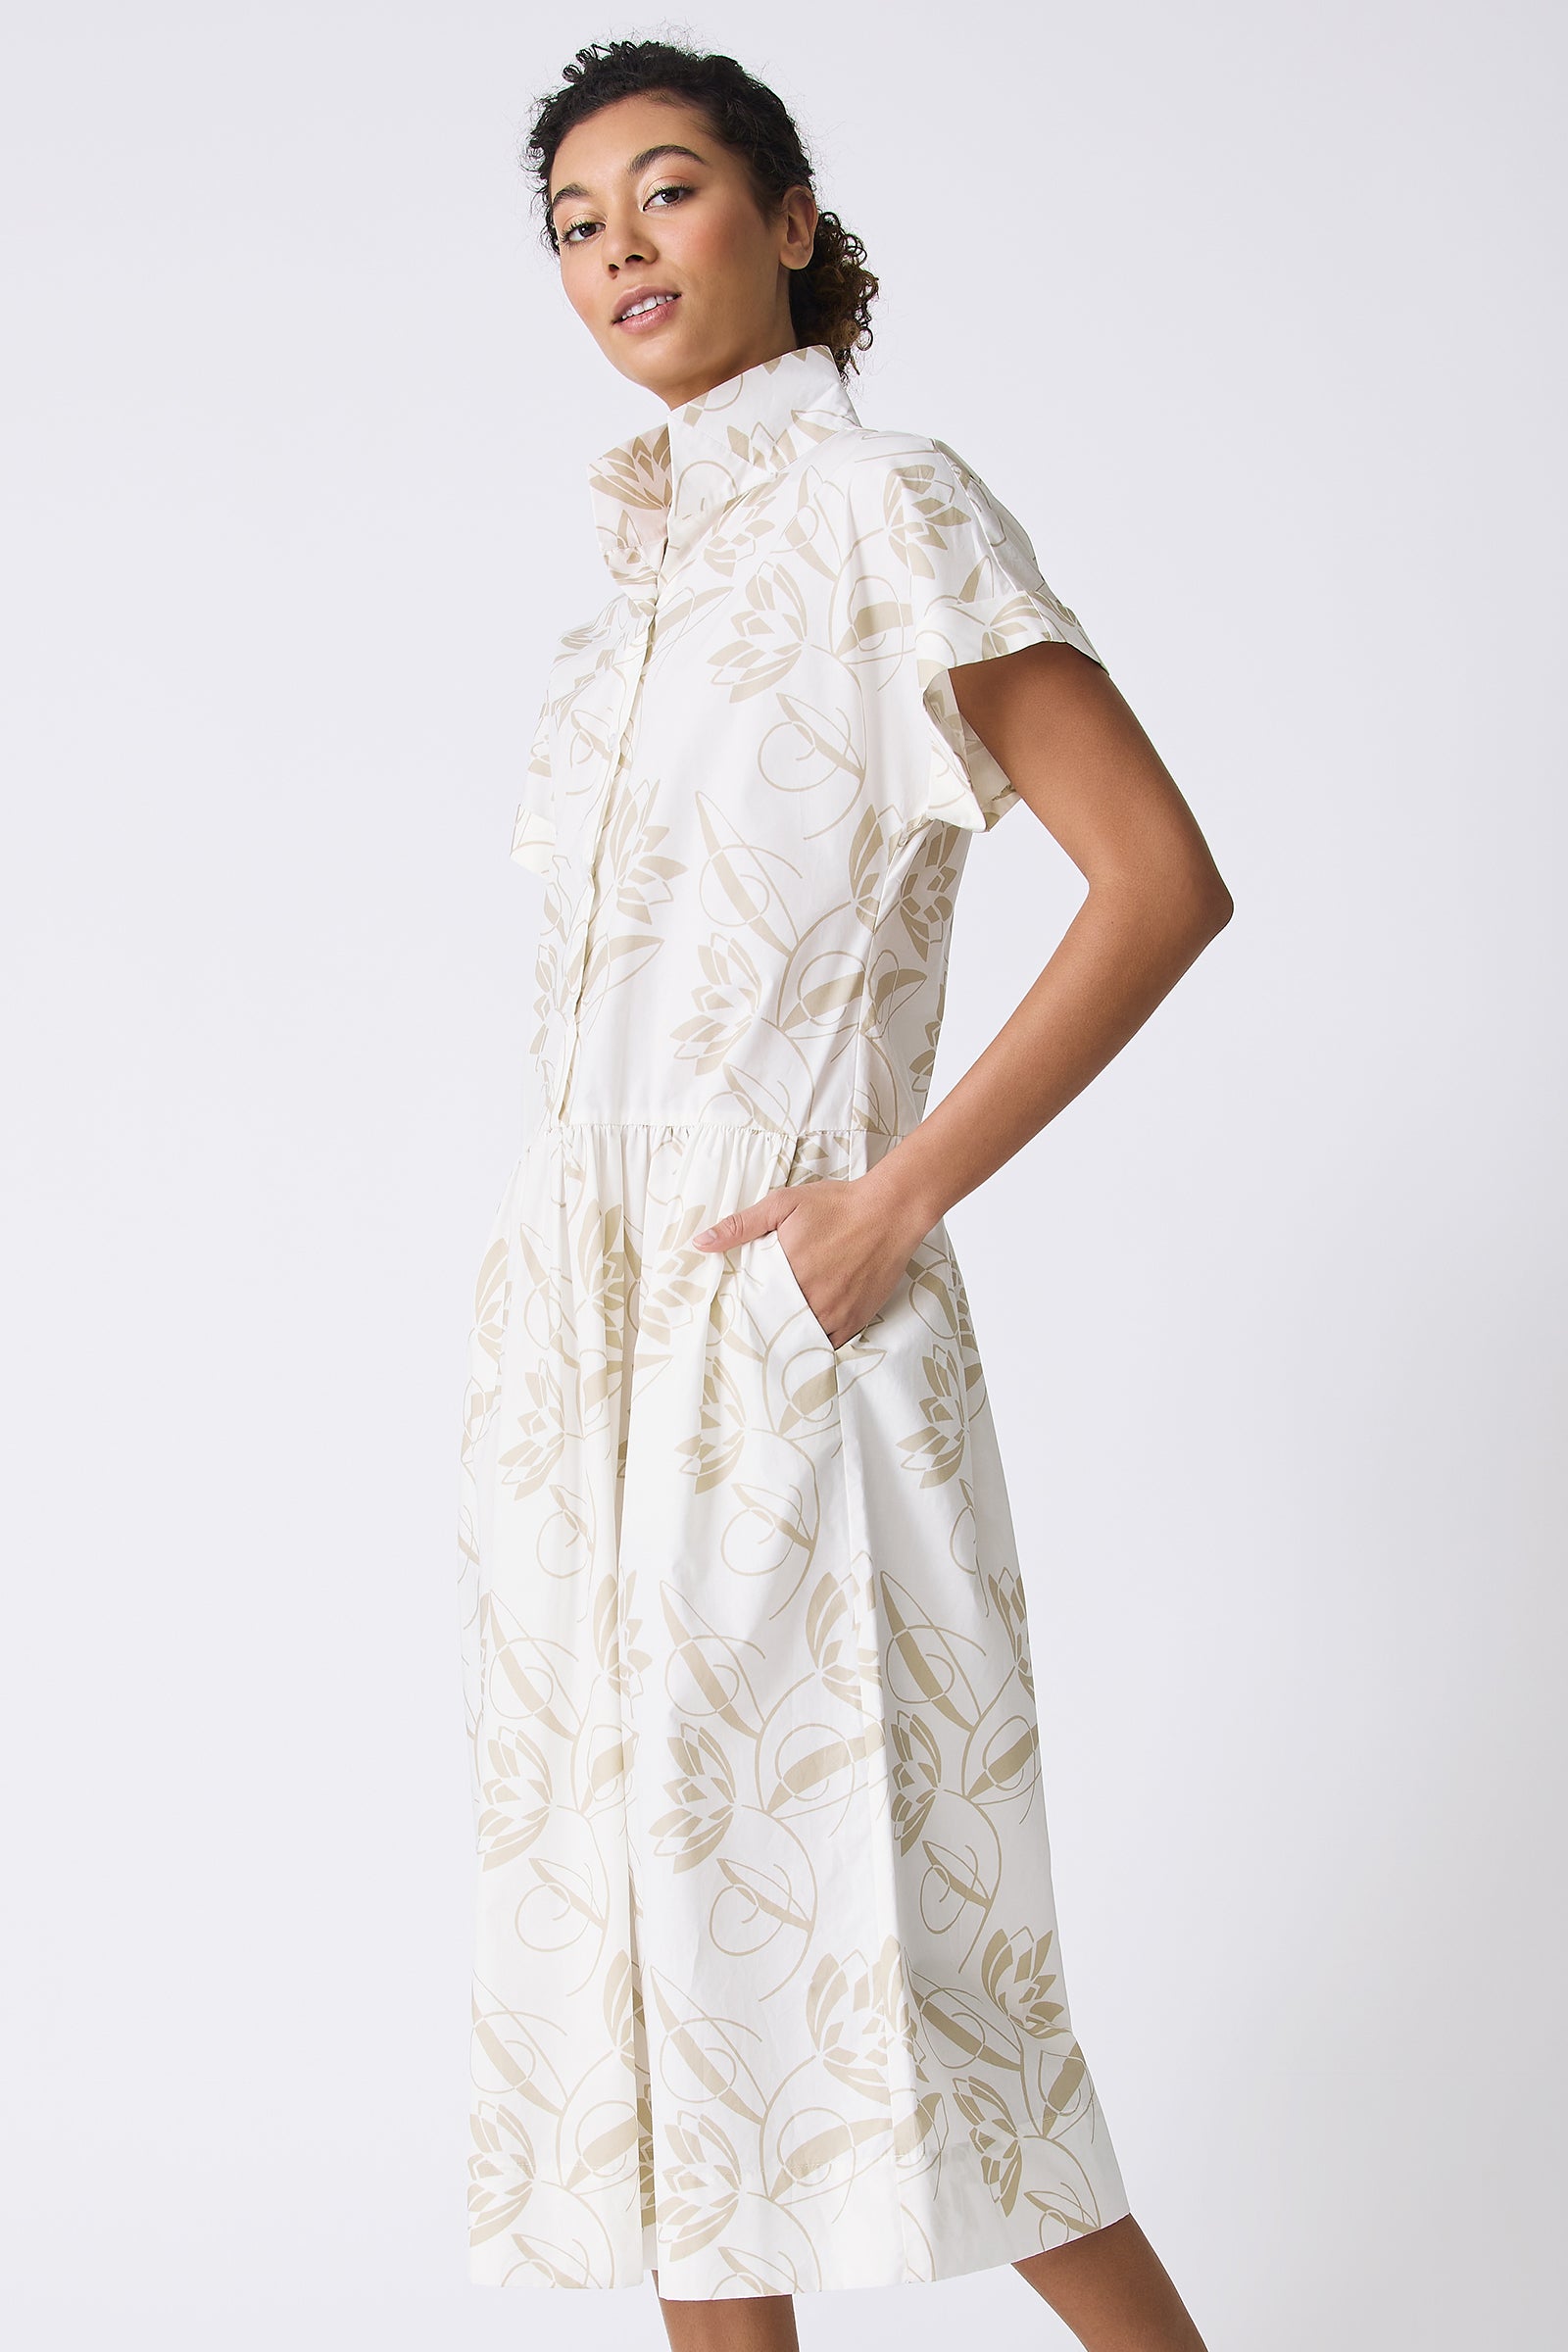 Kal Rieman Tanya Shirt Dress in Lotus Print on model with hand in pocket side view